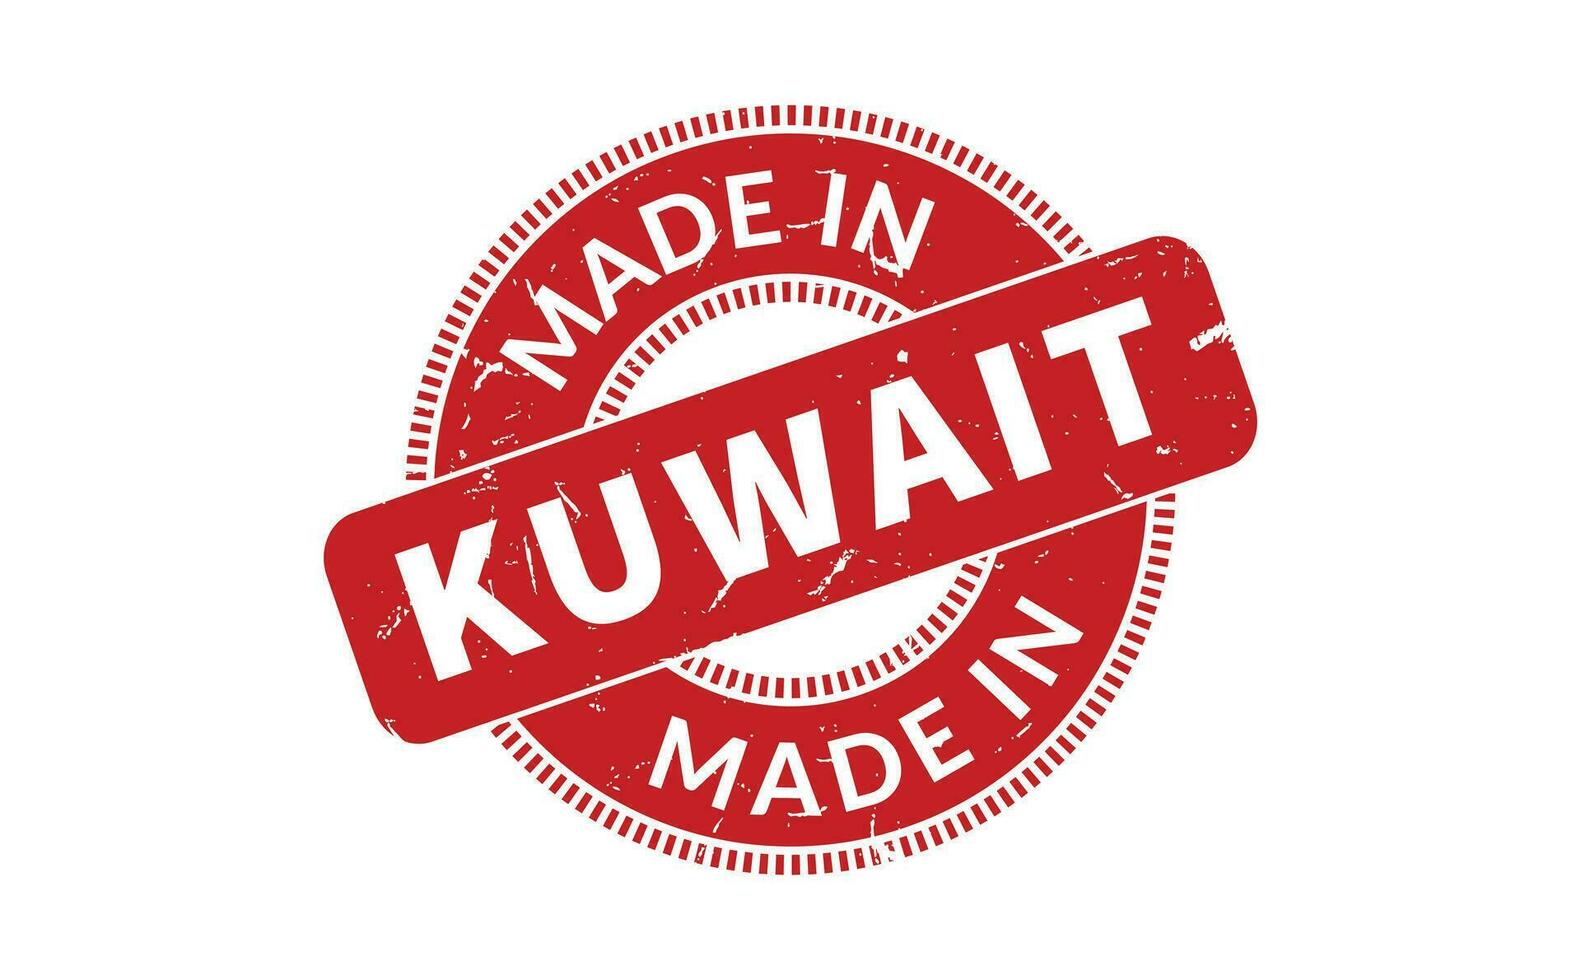 Made In Kuwait Rubber Stamp vector